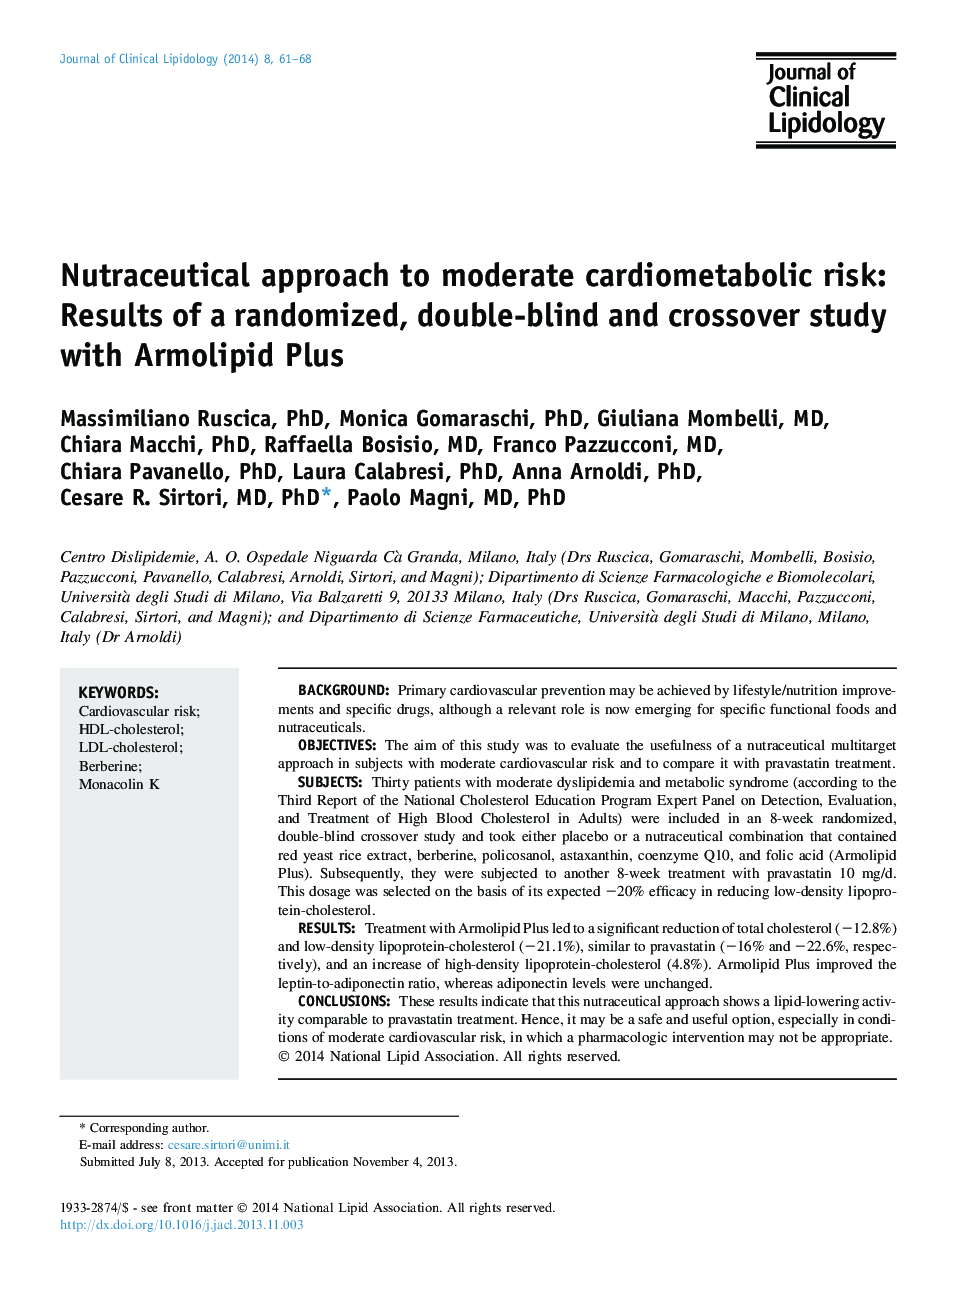 Nutraceutical approach to moderate cardiometabolic risk: Results of a randomized, double-blind and crossover study with Armolipid Plus